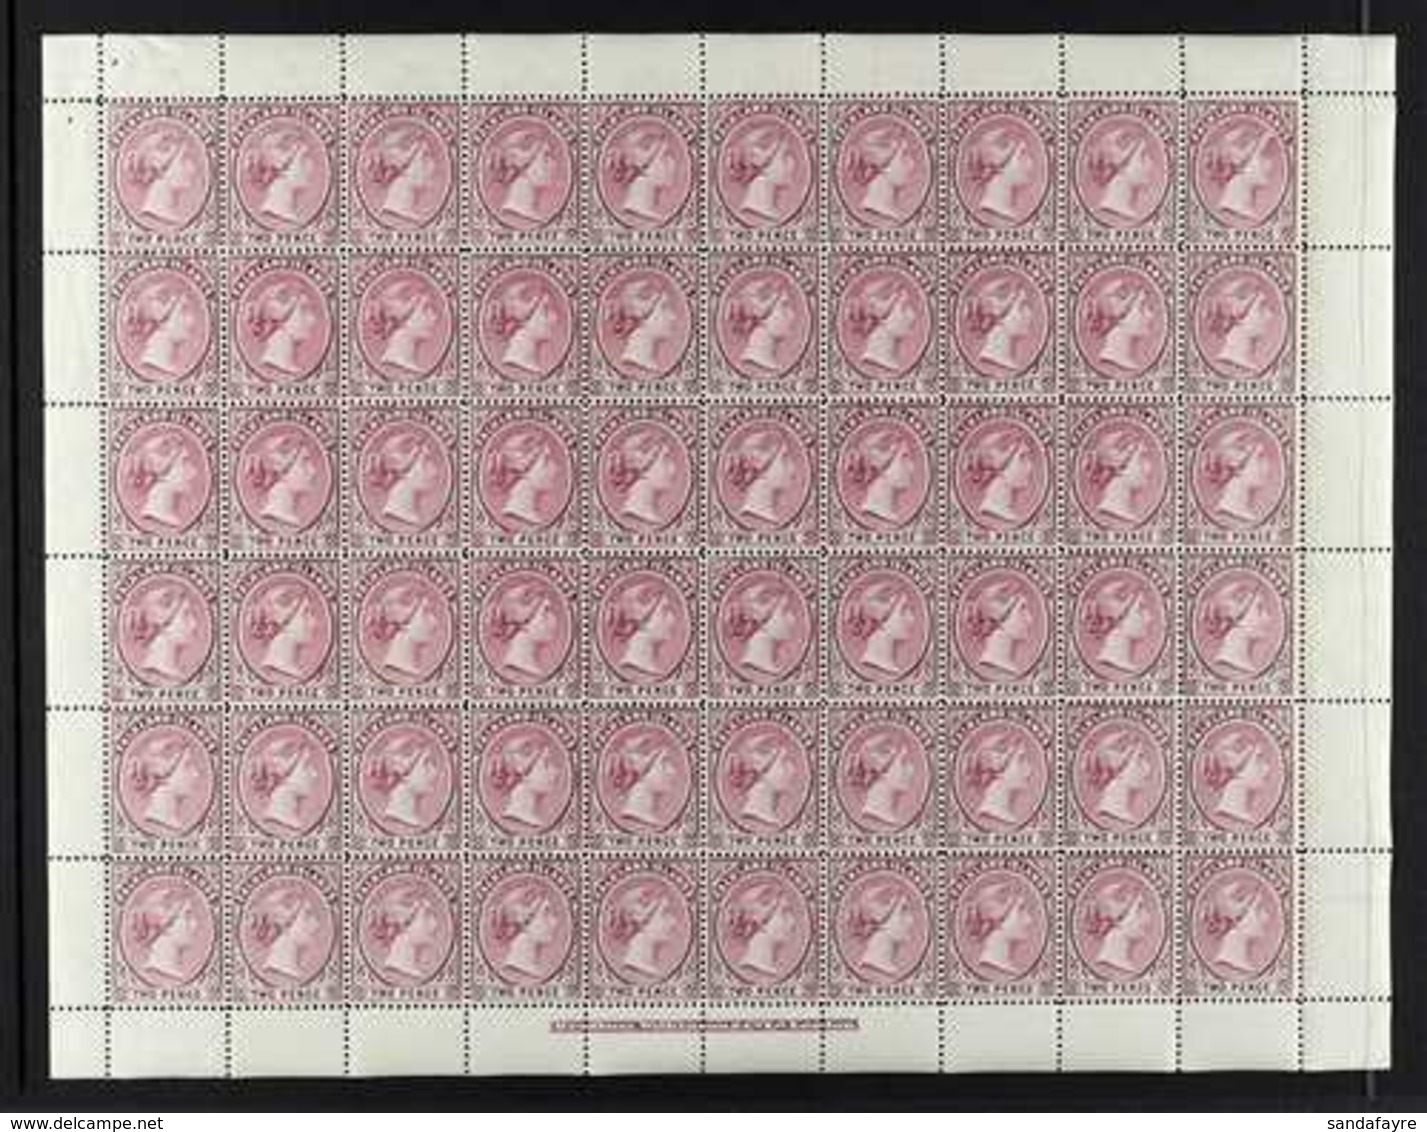 1895-98 2d Deep Purple, Wmk Crown CA SG 25, Complete Sheet Of 60 Never Hinged Mint. Superbly Fresh Without Hinging Anywh - Falklandeilanden